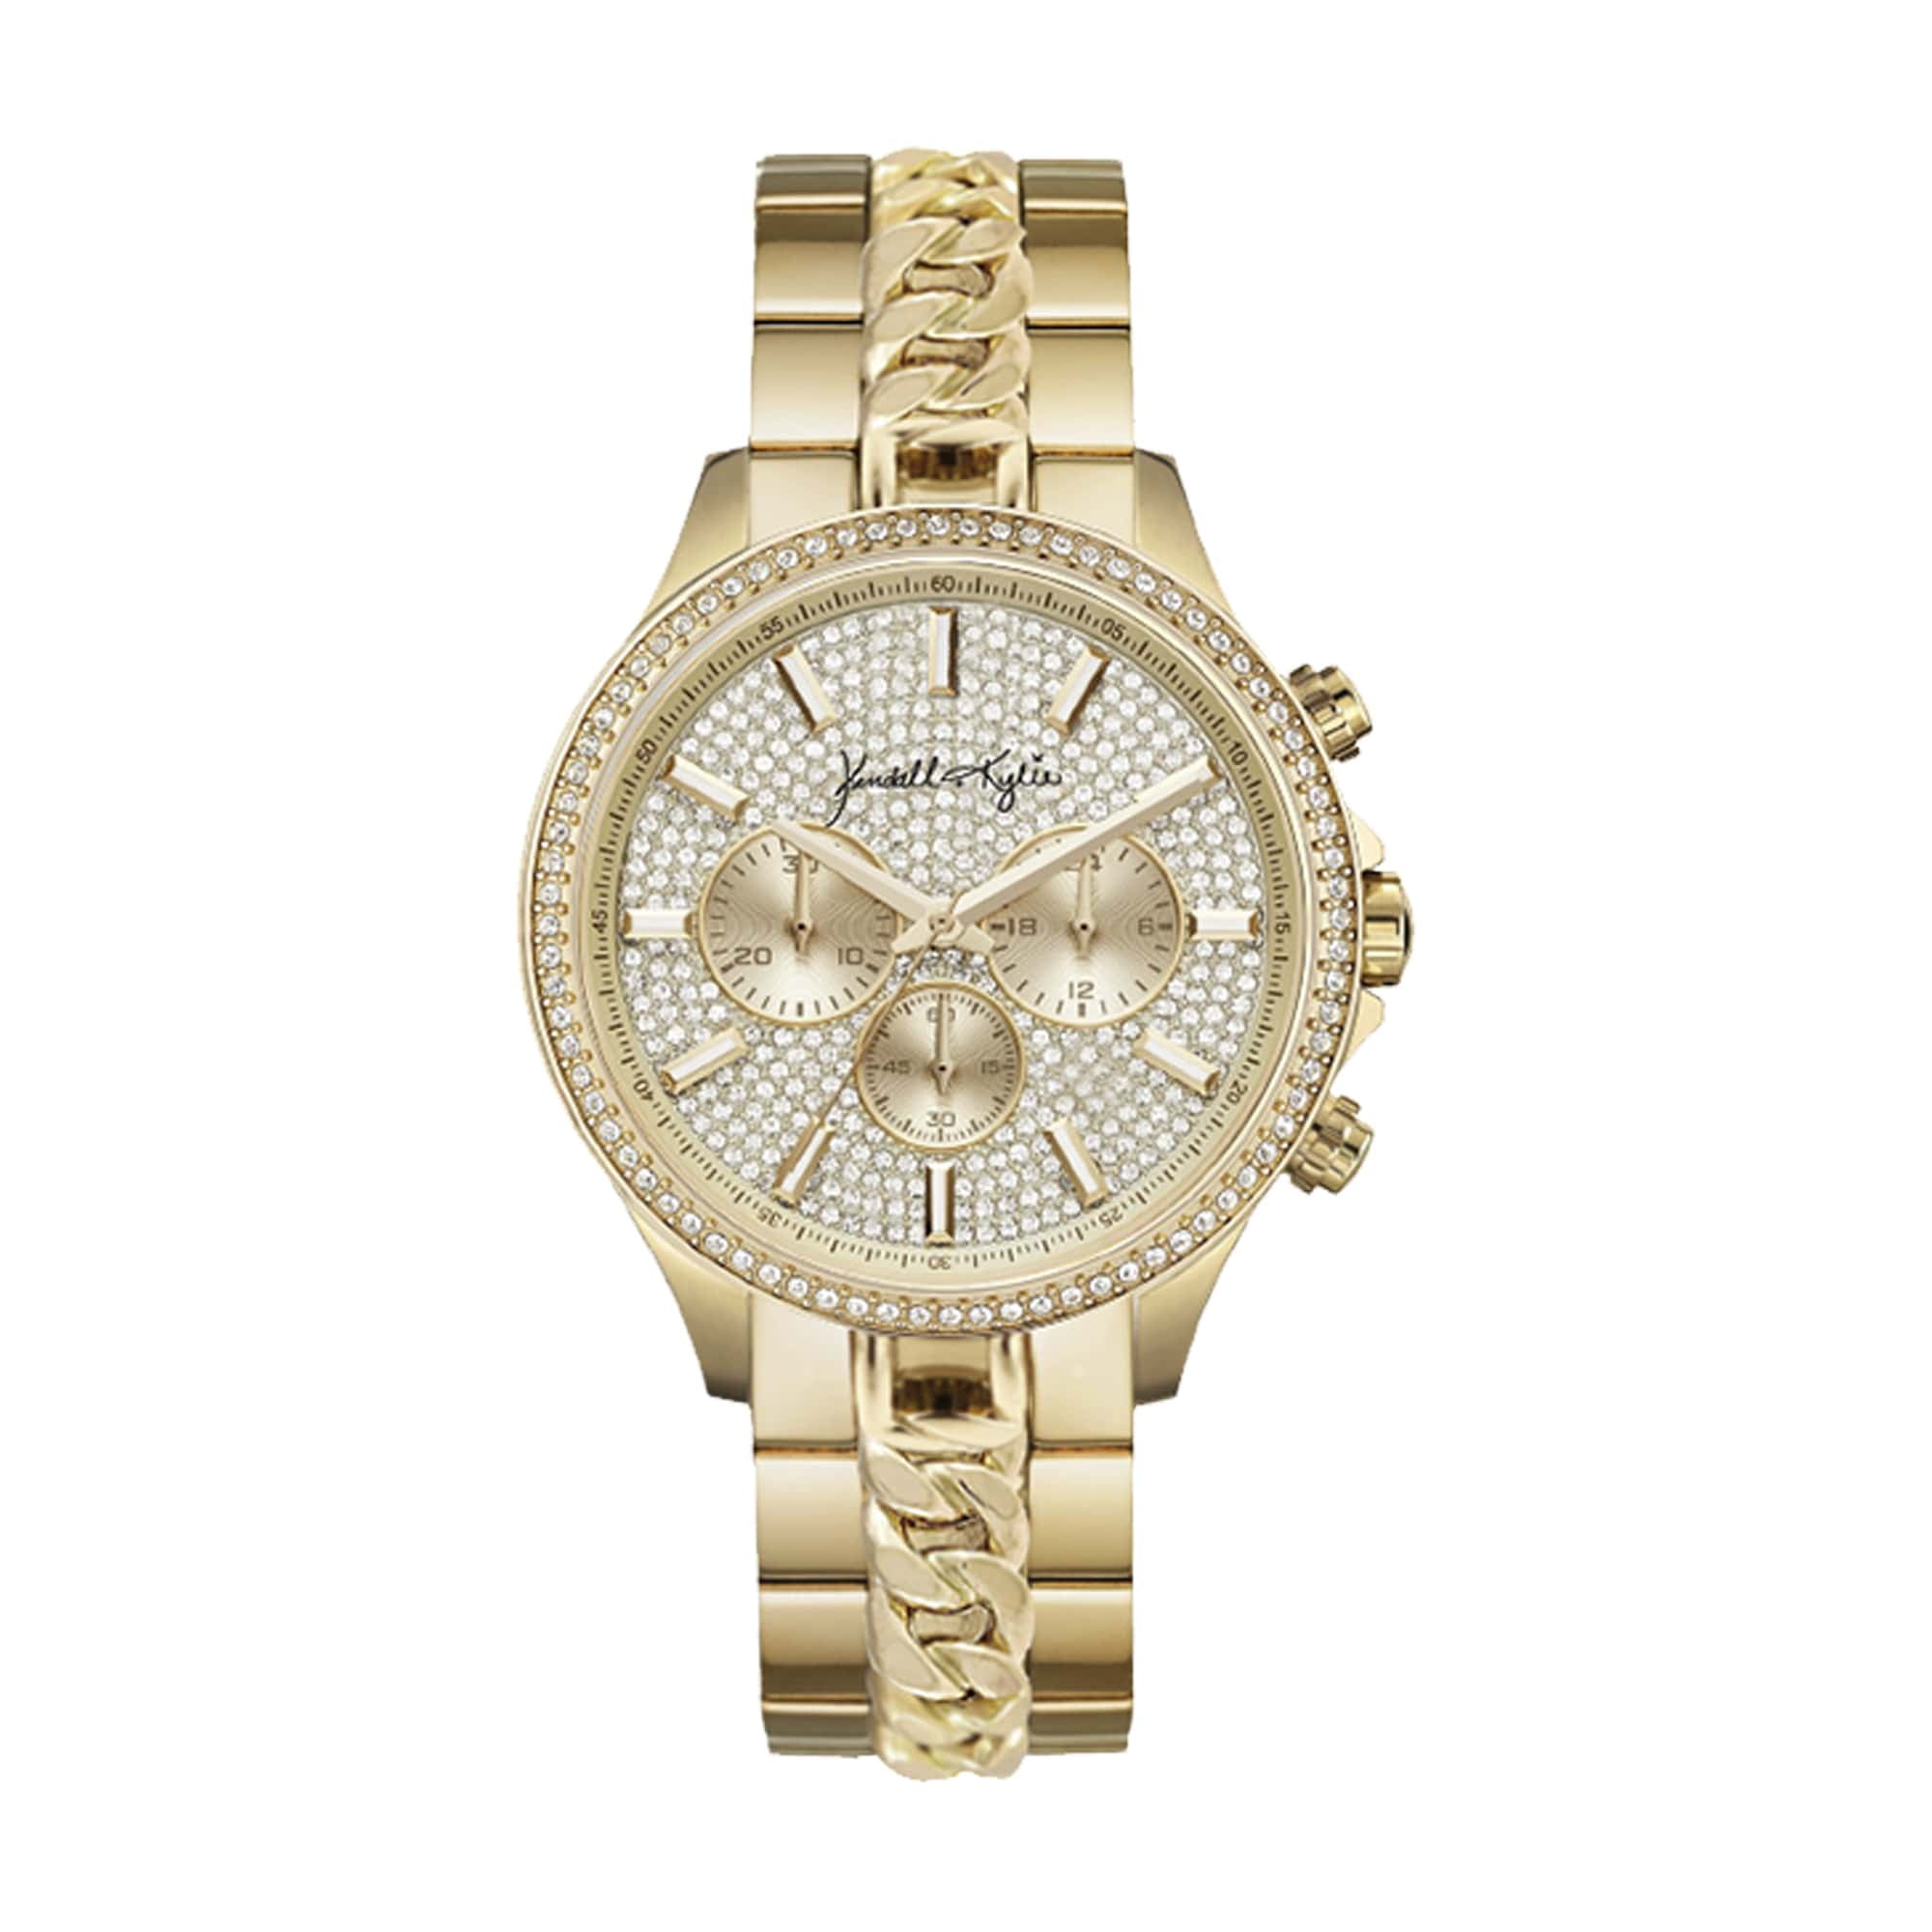 Kendall + Kylie Chronograph Rosegold Tone Metal Strap Analog Watch